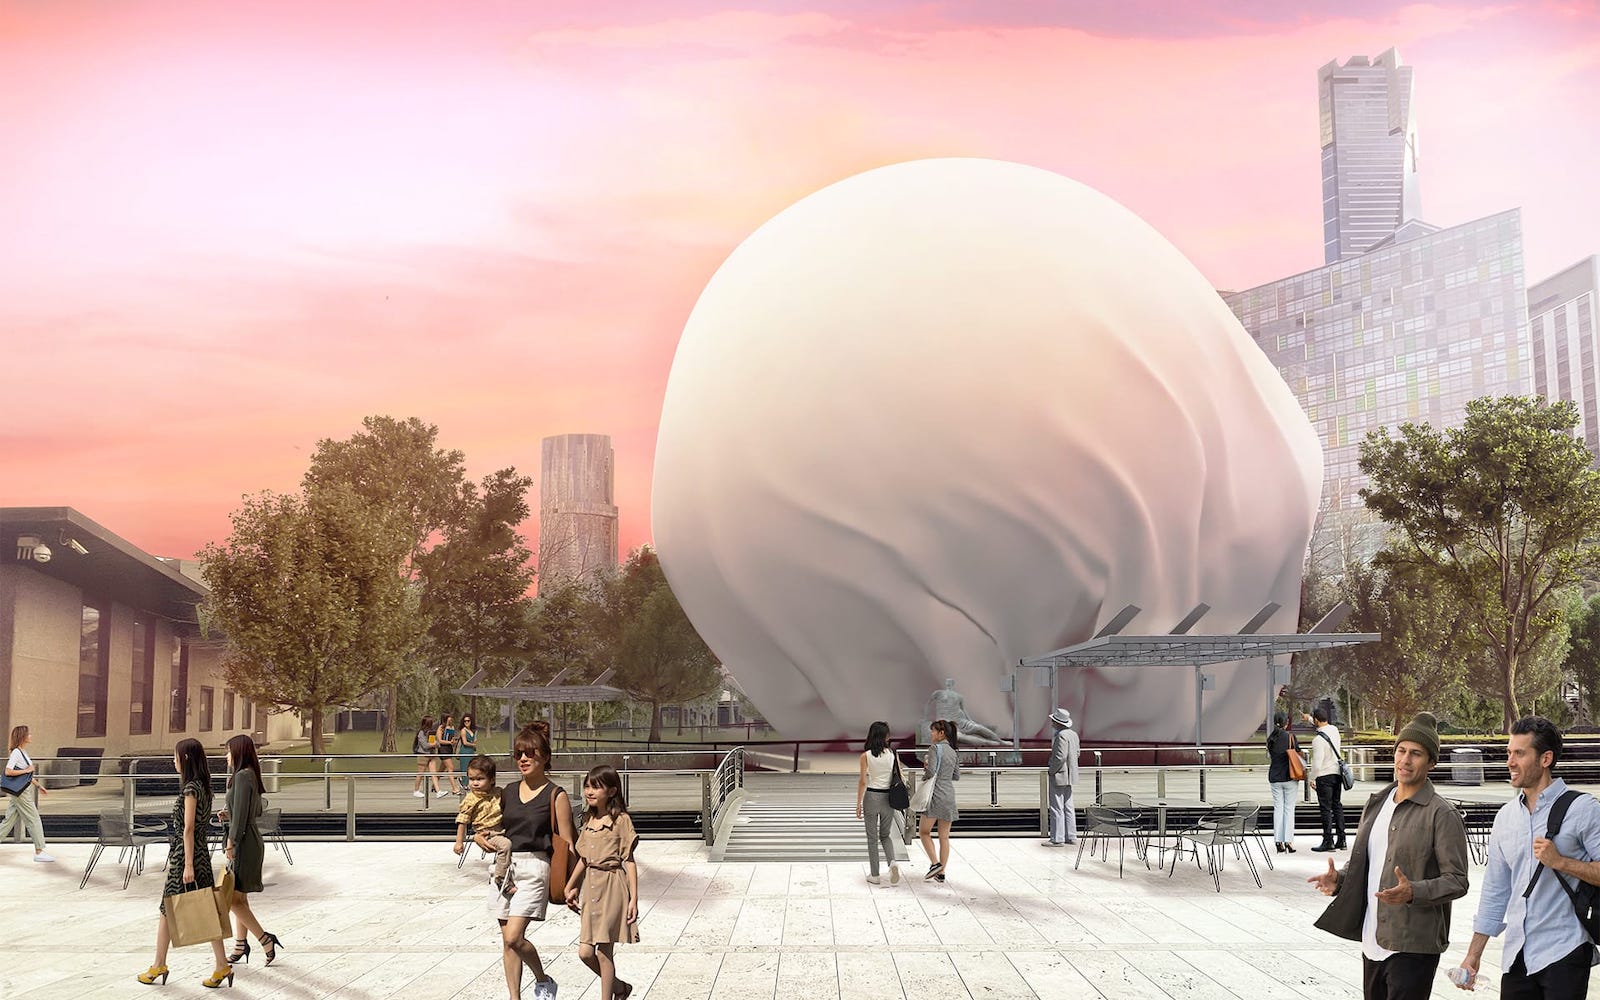 This Is) Air: The NGV's new public artwork is a sphere that can breathe